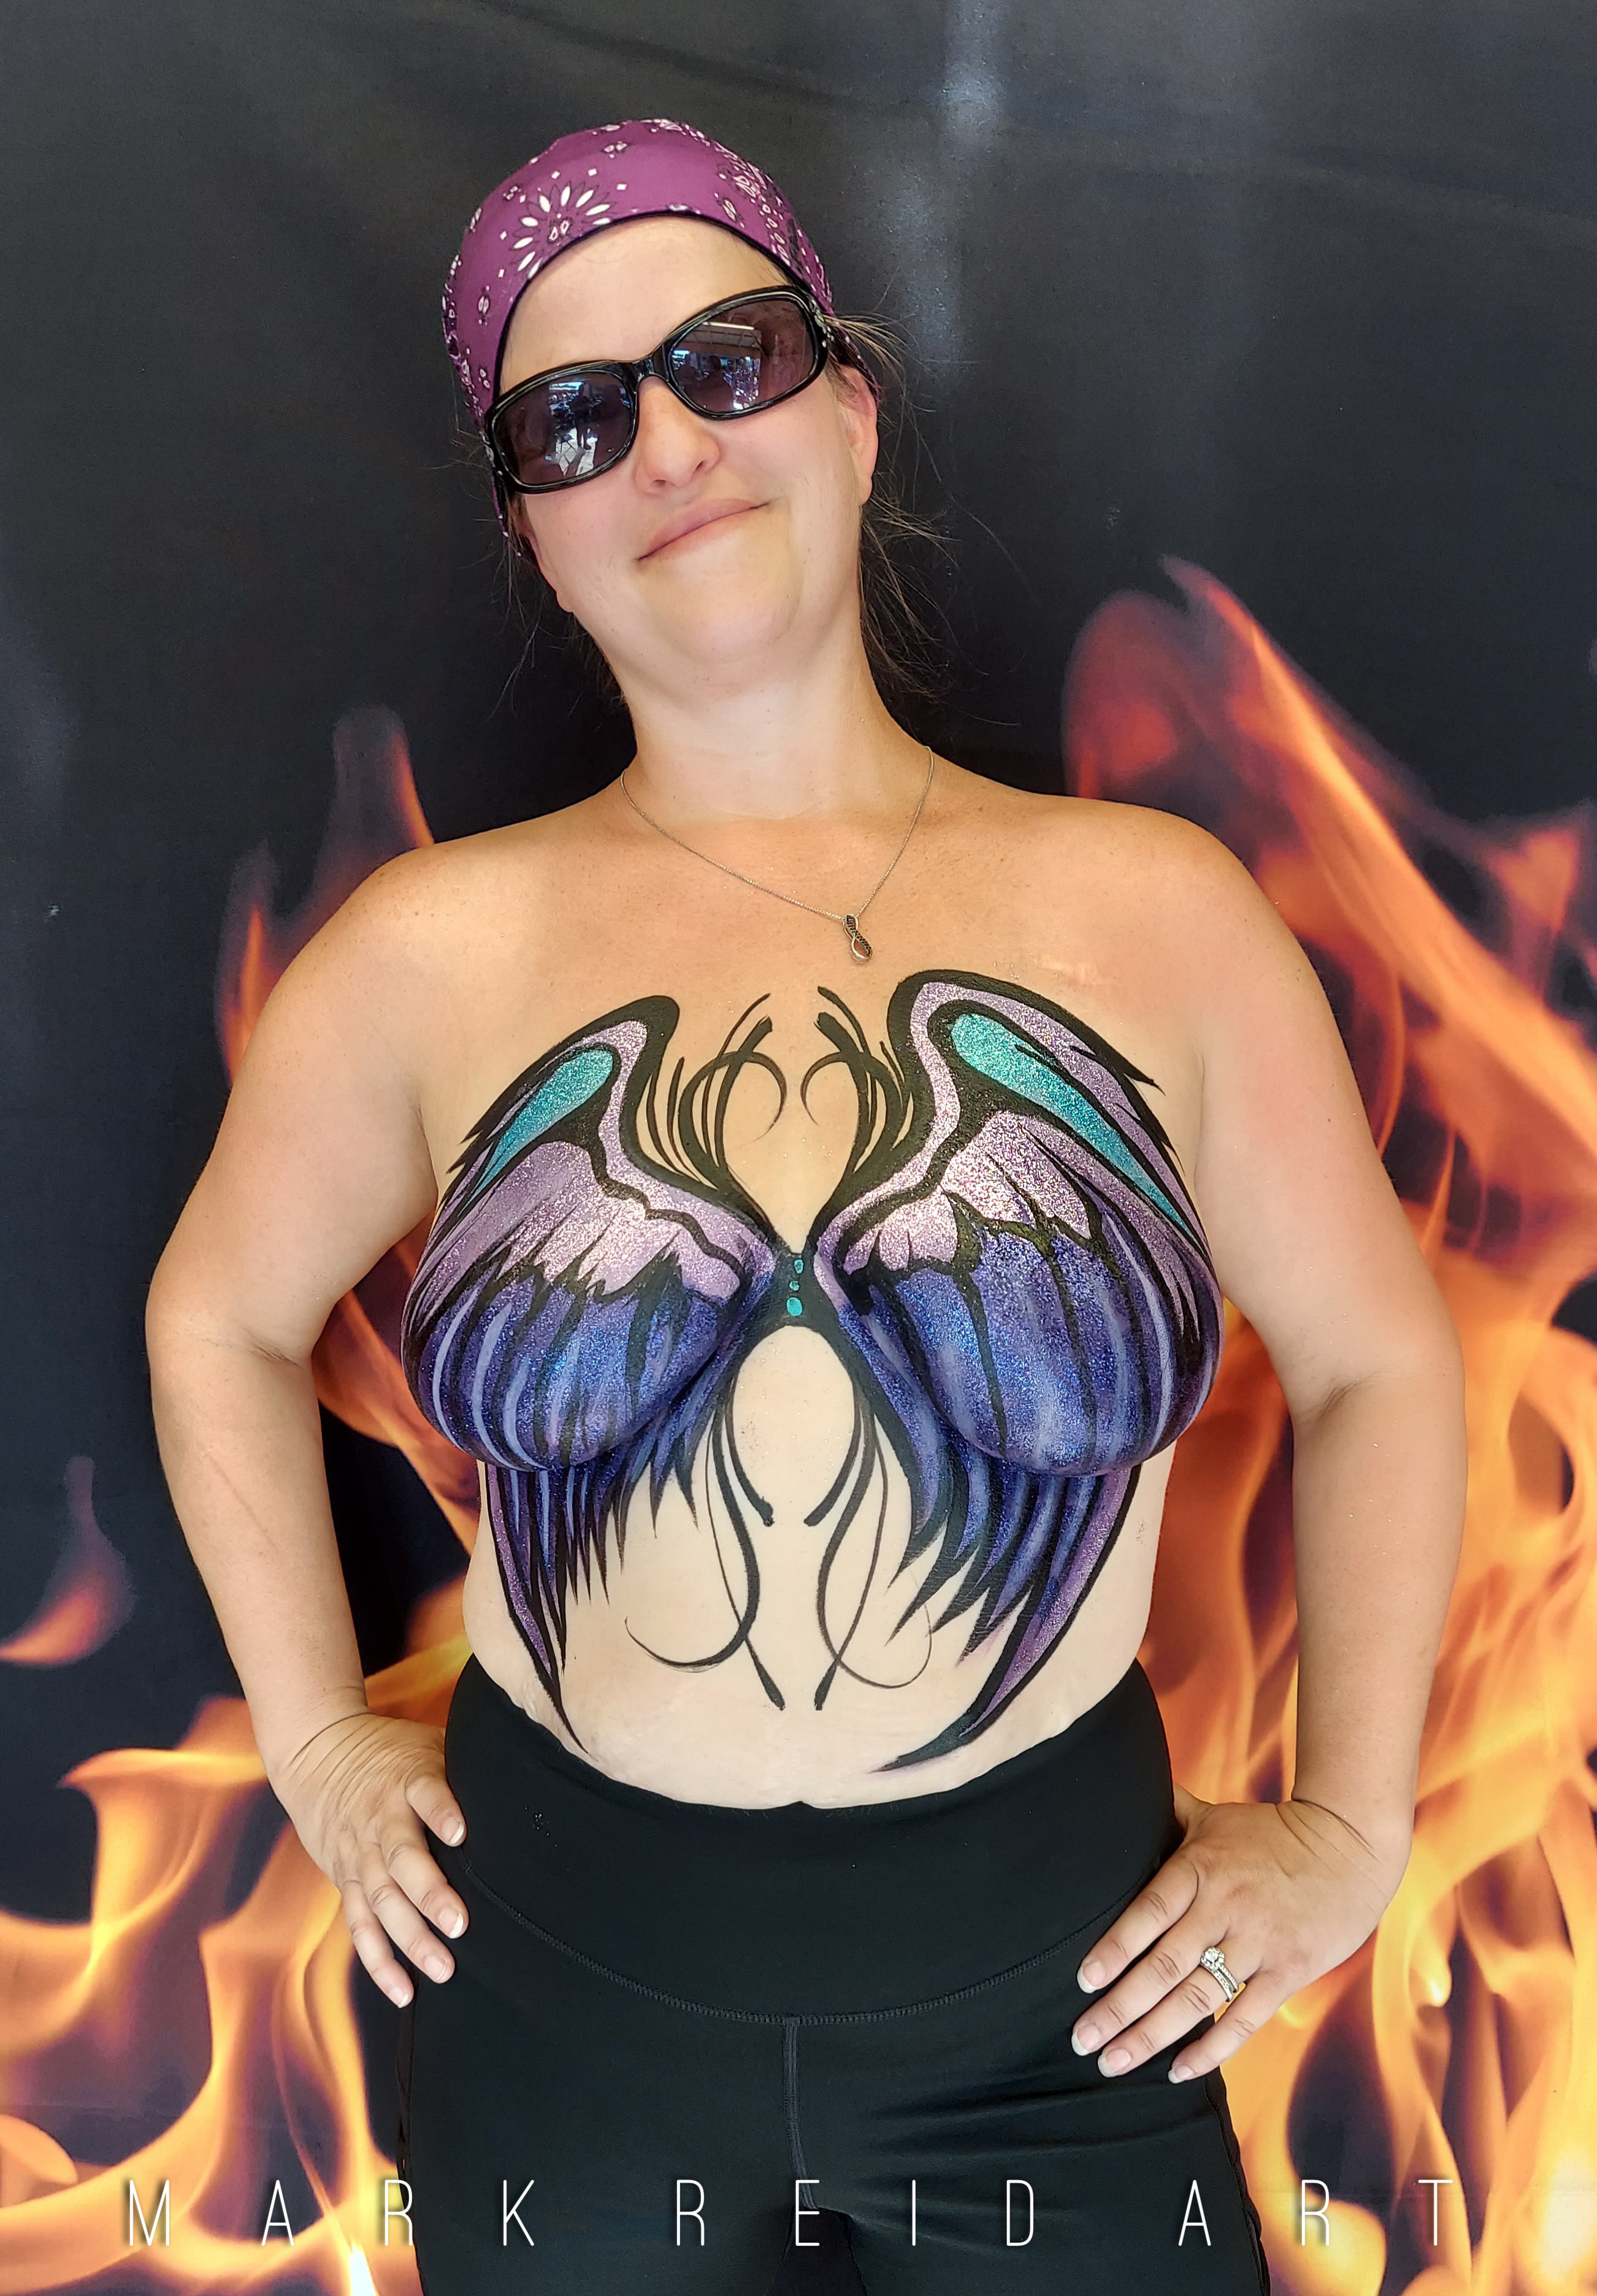 Dark haired woman with a puprle headband sporting a painted on top of light blue, medium blue, and a light purple. The wings originate from her sternum and spread across her breasts with finely detailed feathers that reach down to her waistline